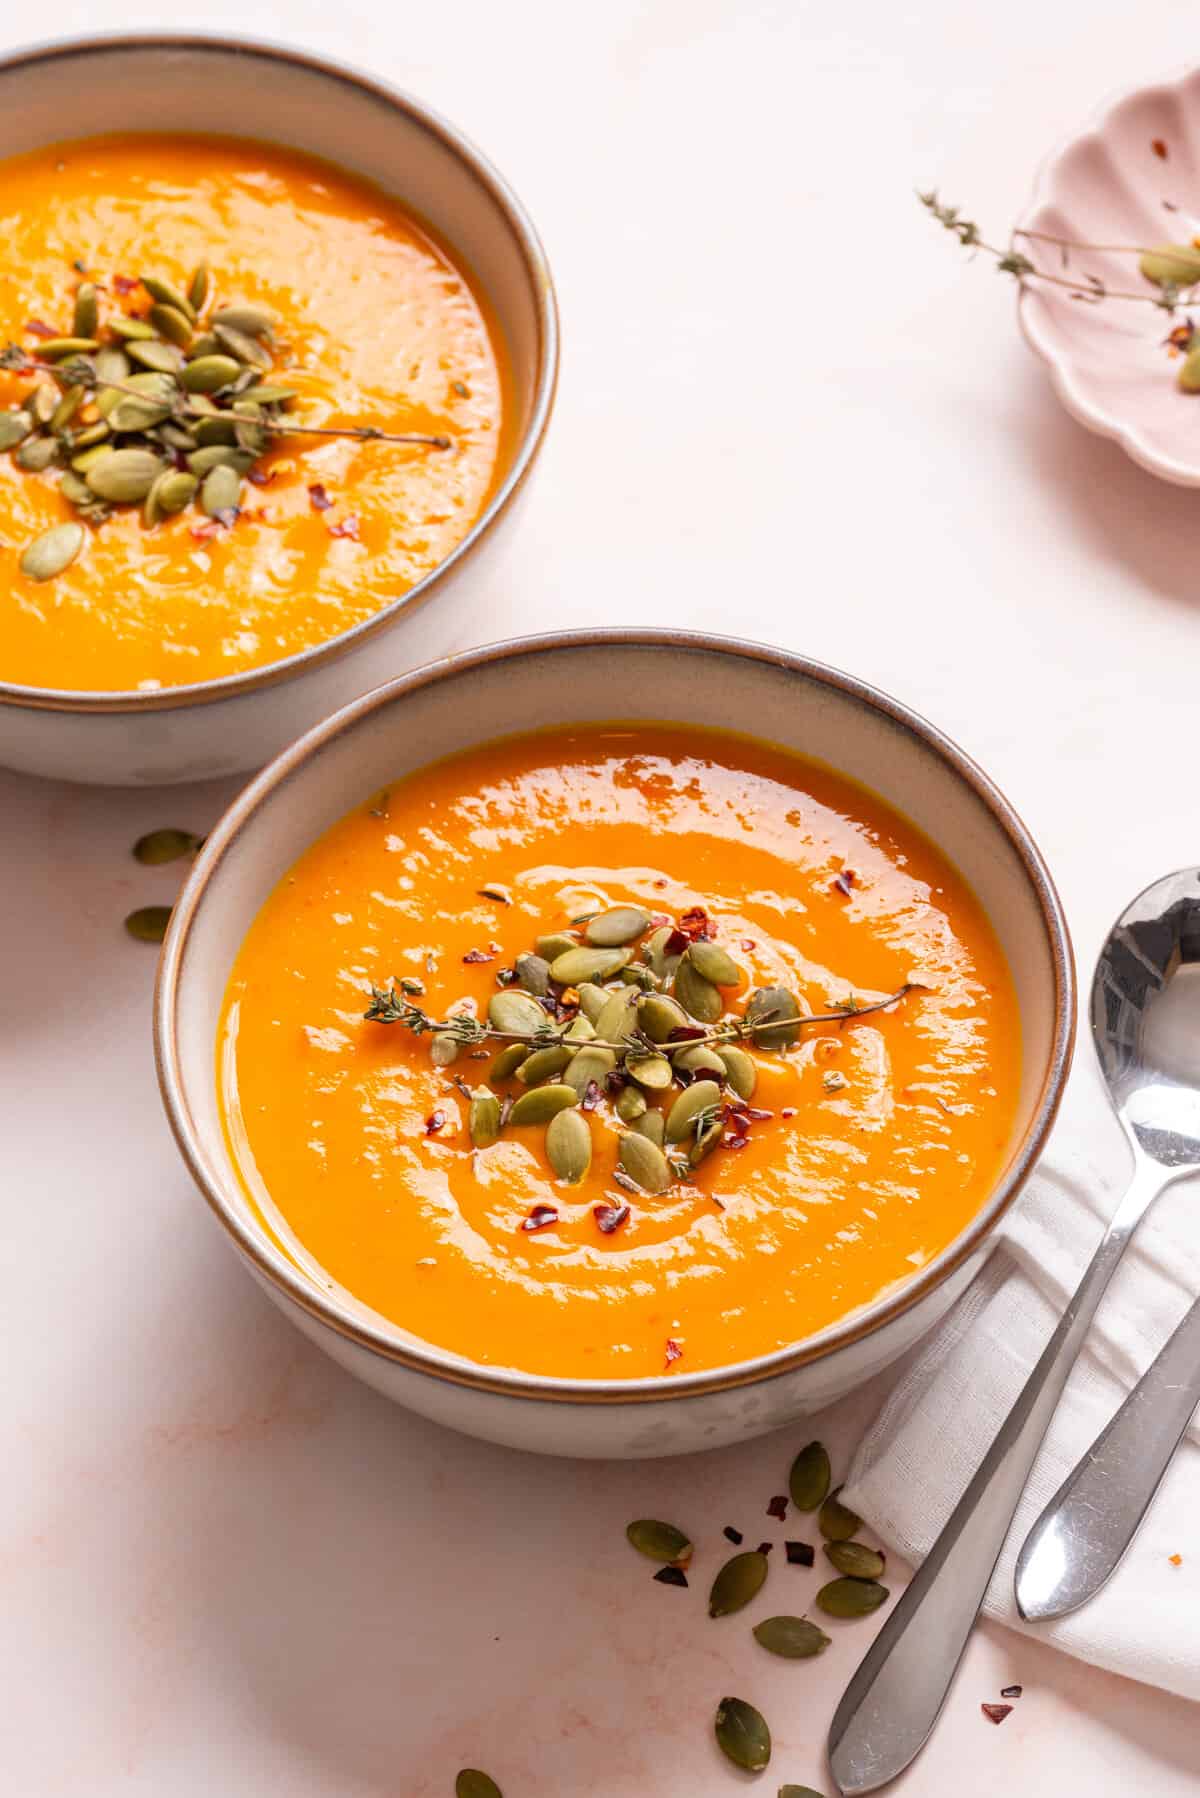 An image of acorn squash soup in a bowl garnished with thyme.